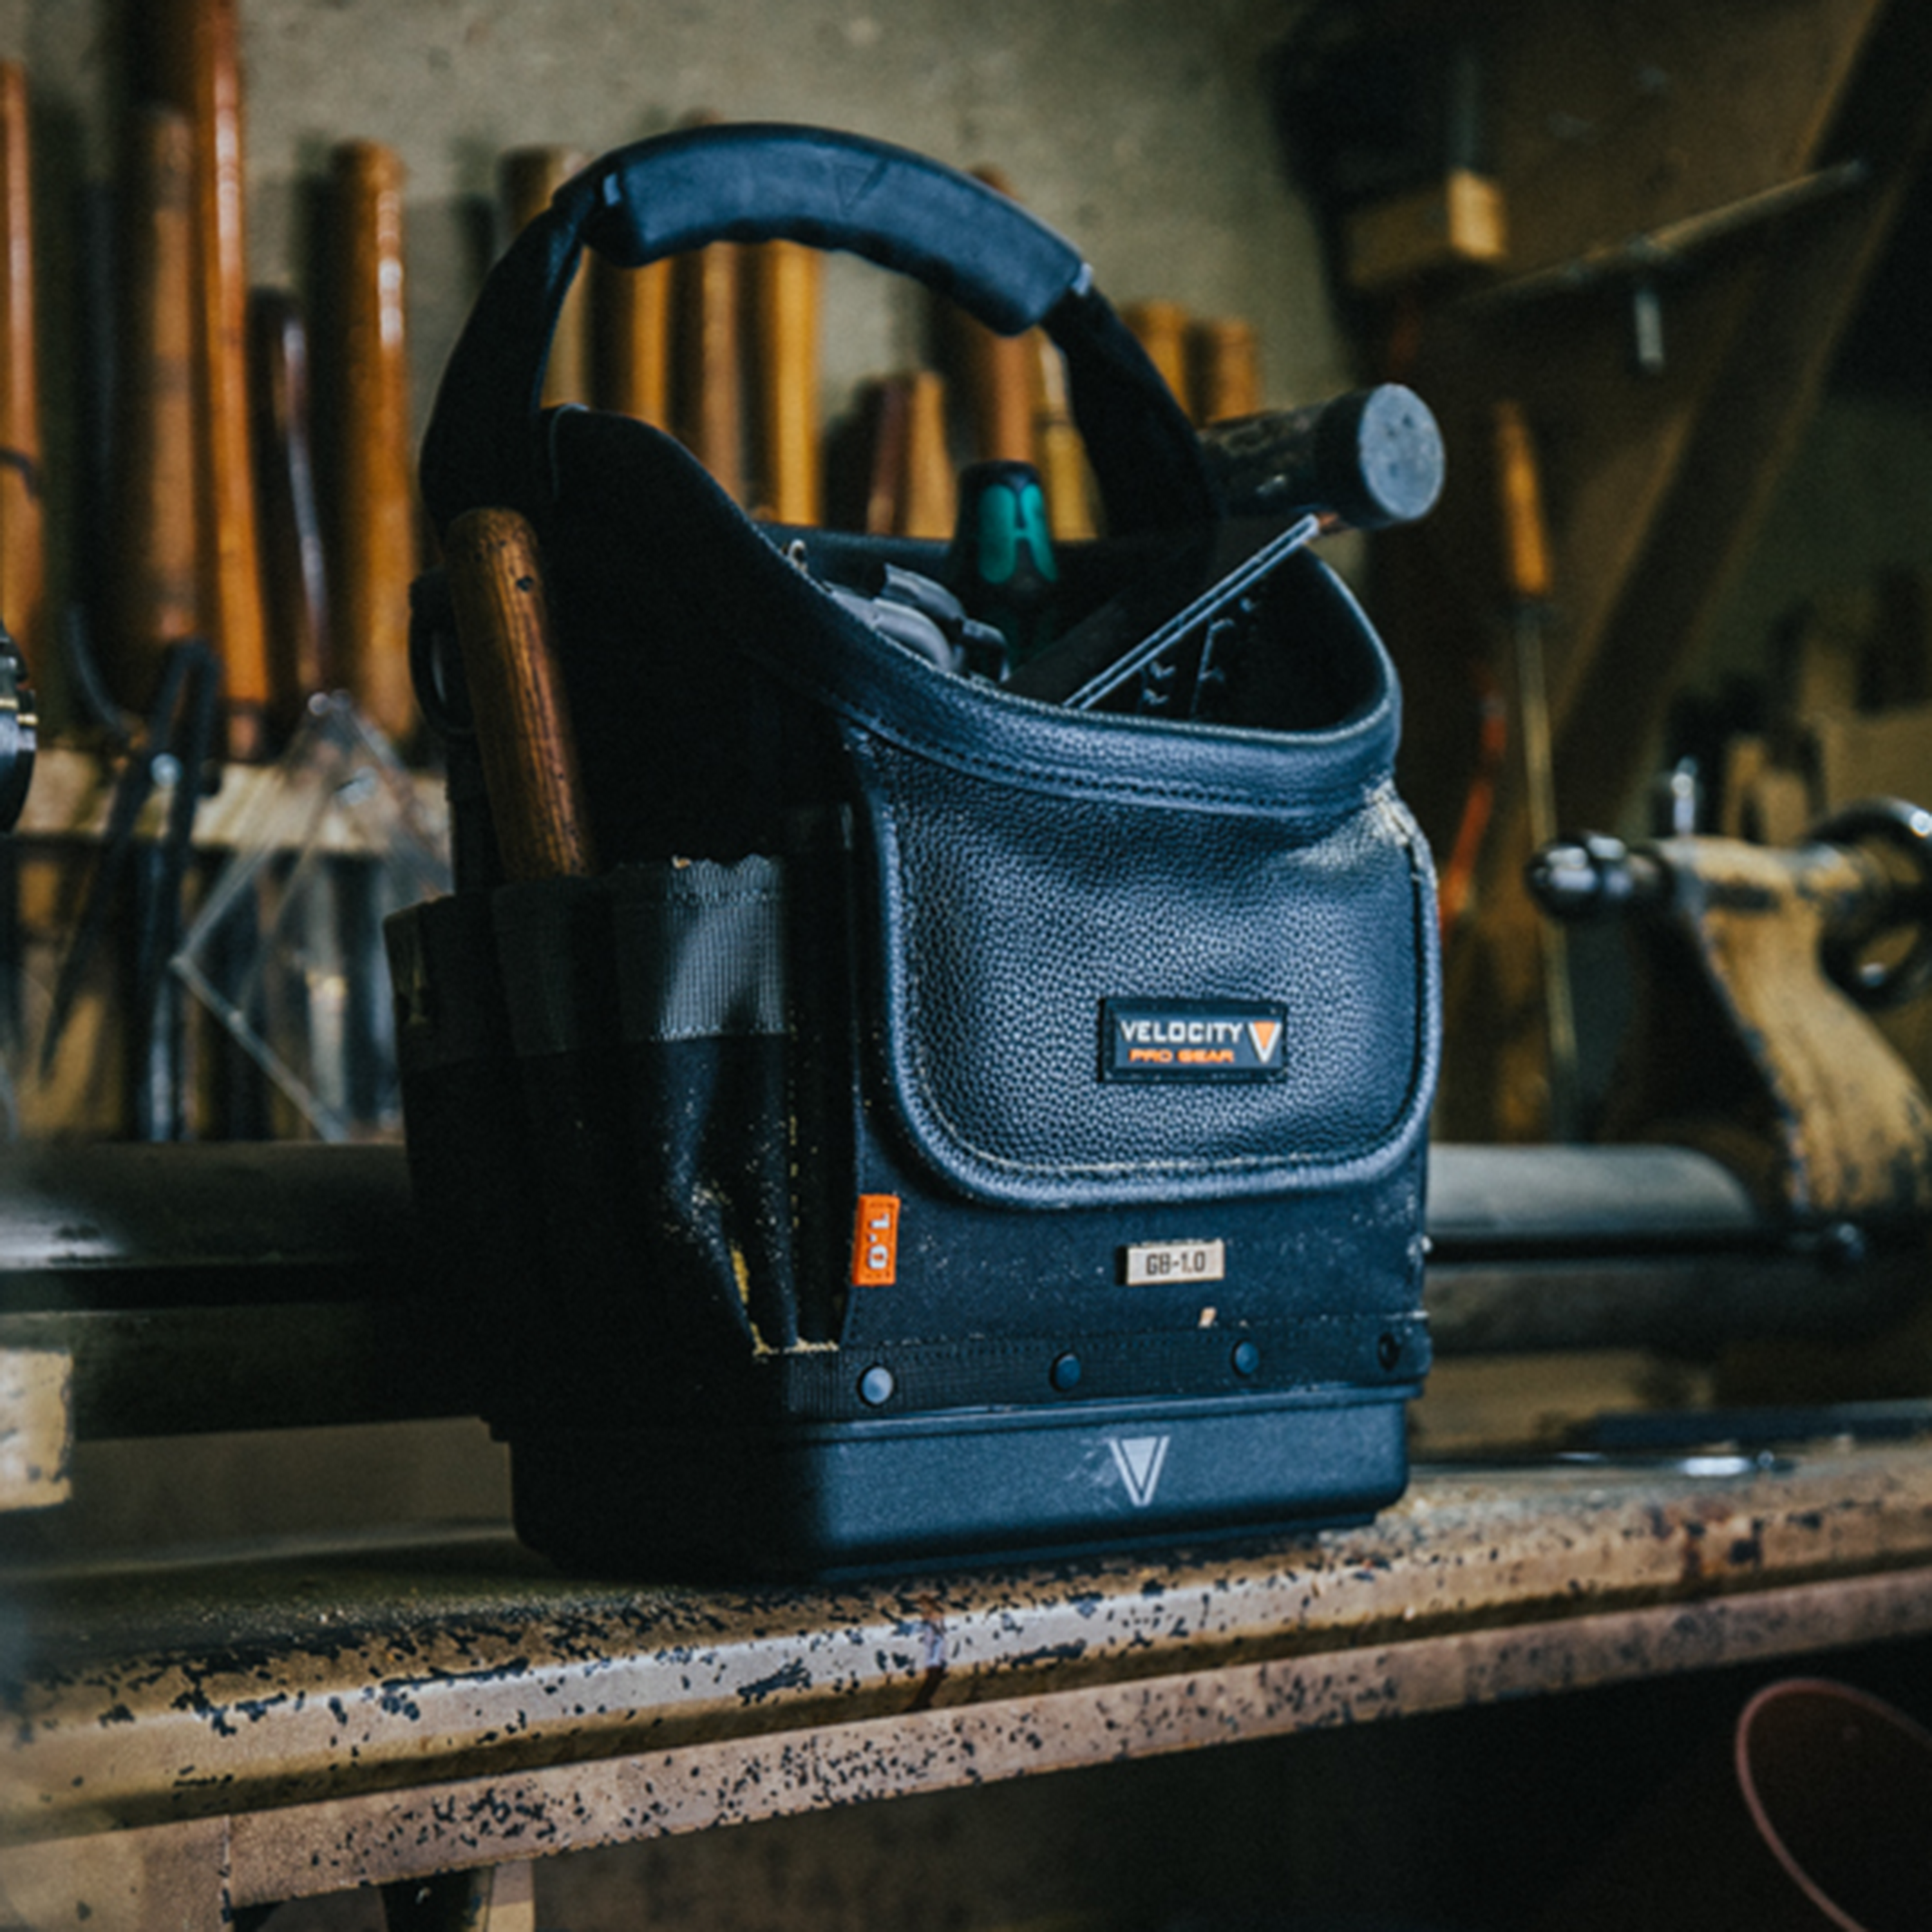 Velocity Rogue 1.0 Open Tote tool bag with tools in the top sitting on a workshop bench